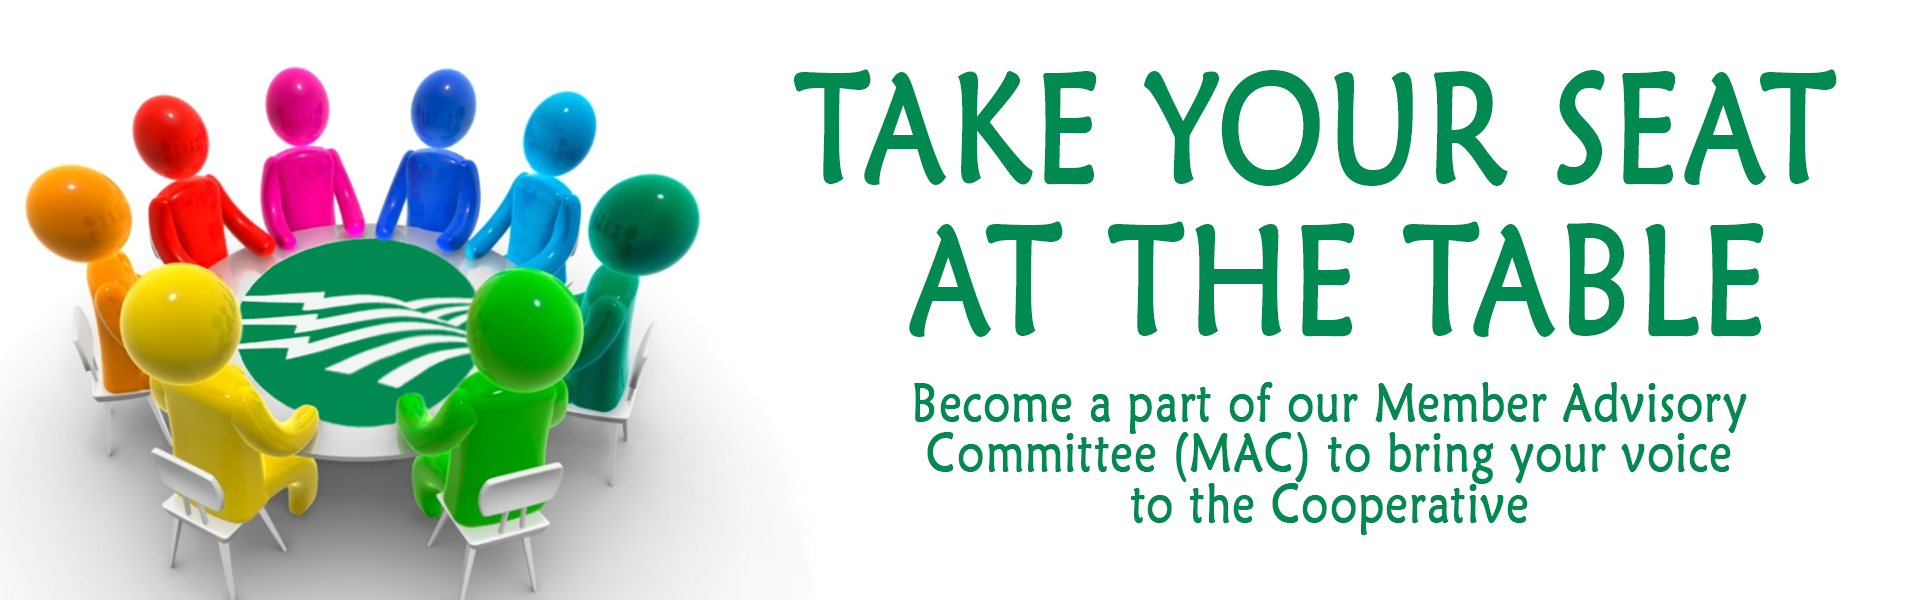 TAKE YOUR SEAT AT THE TABLE. Become a part of our Member Advisory Committee (MAC) to bring your voice to the Cooperative!